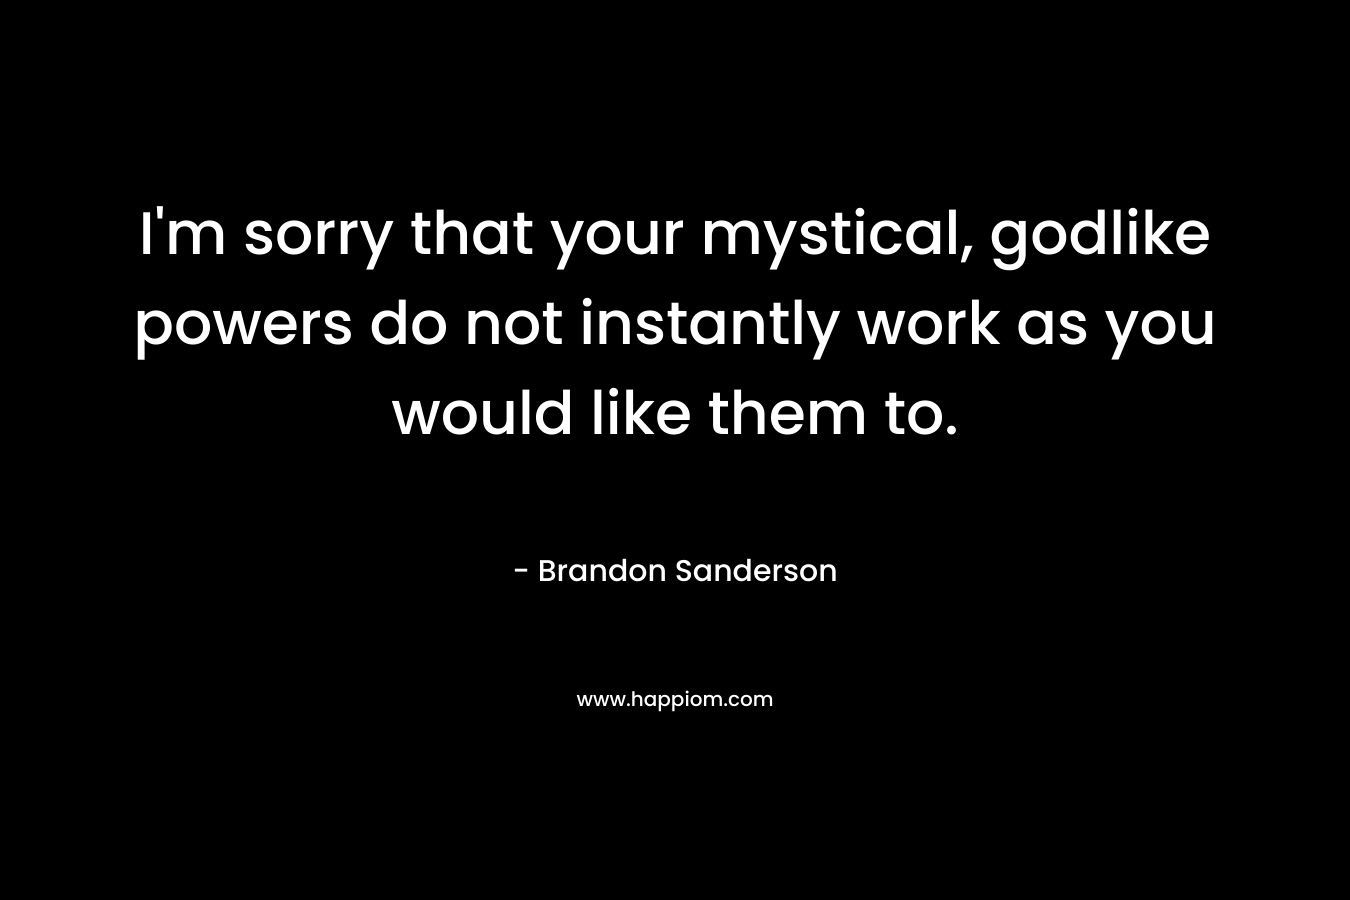 I’m sorry that your mystical, godlike powers do not instantly work as you would like them to. – Brandon Sanderson